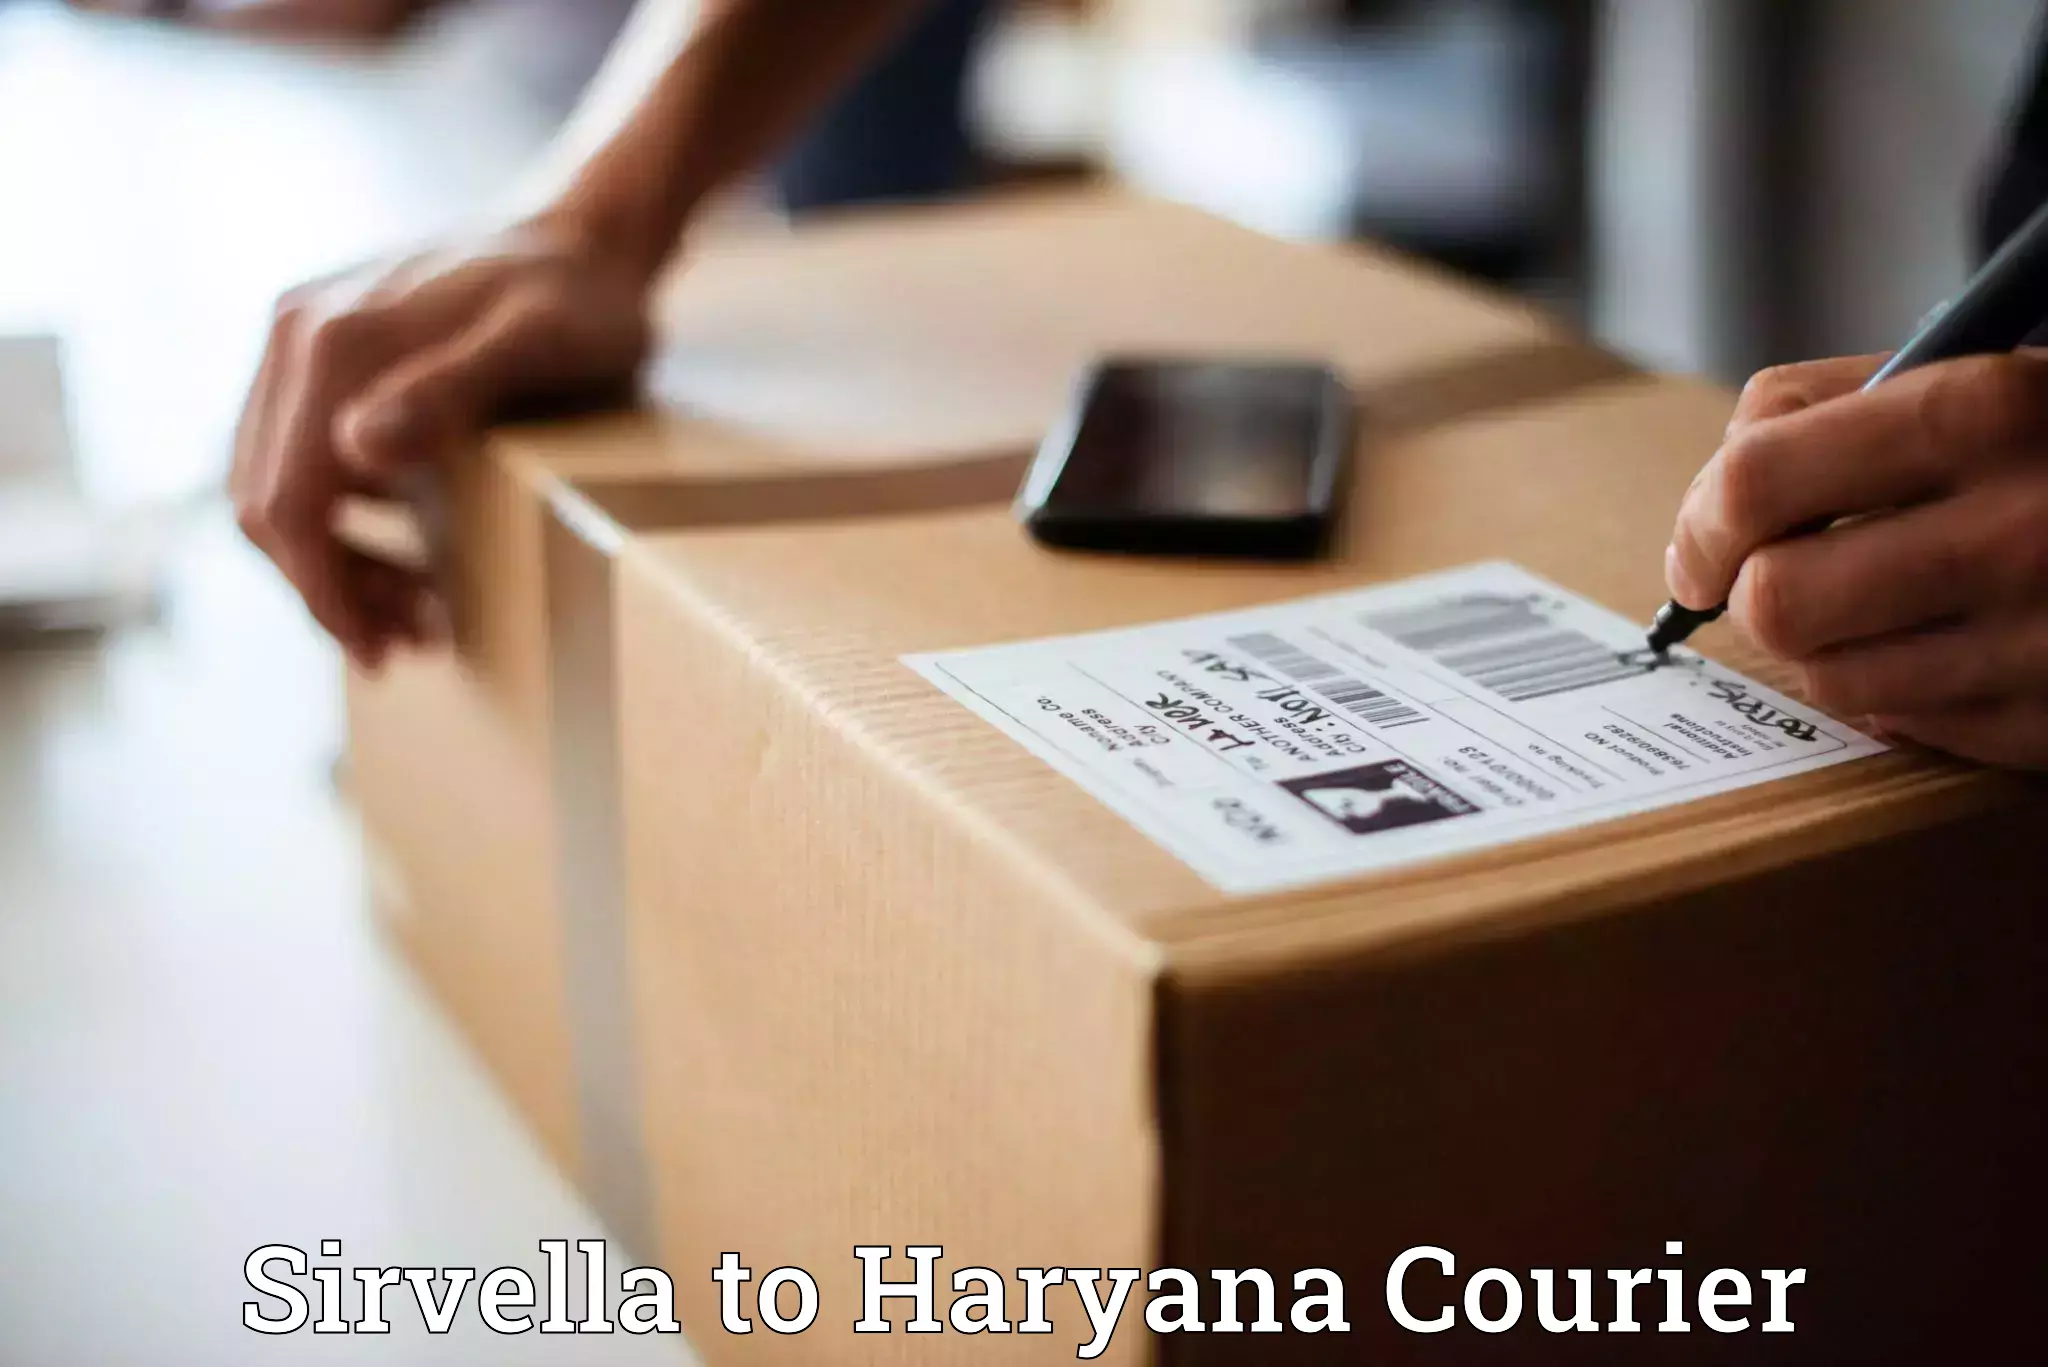 End-to-end delivery in Sirvella to Chaudhary Charan Singh Haryana Agricultural University Hisar